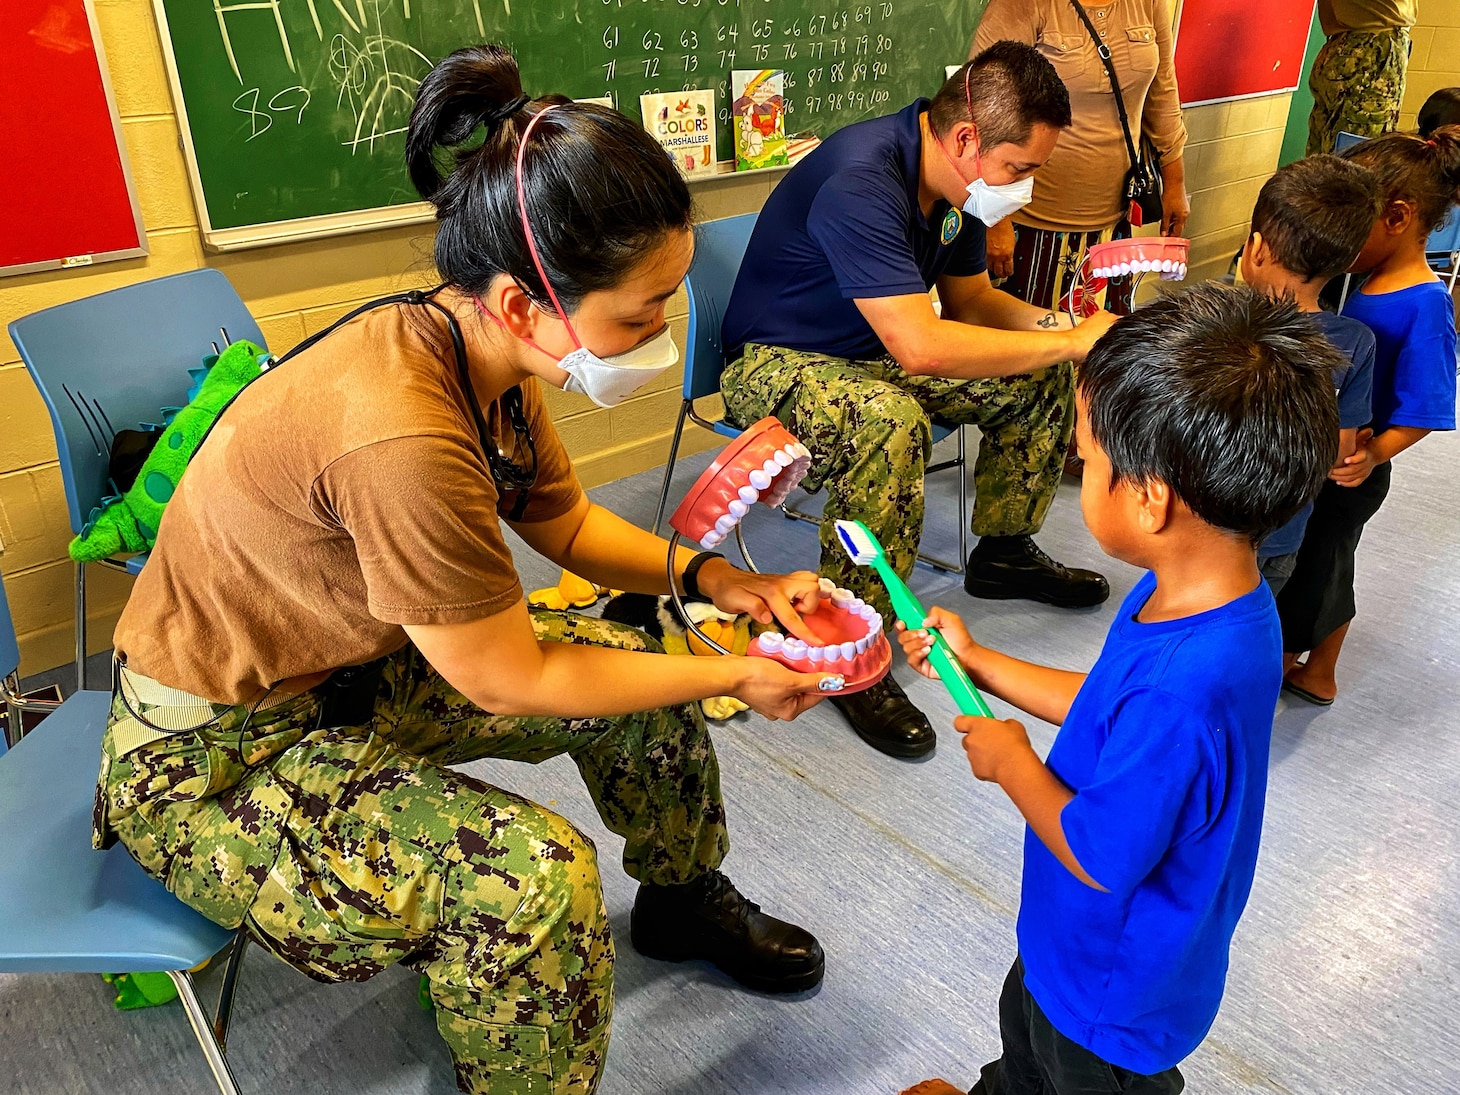 U.S. Navy Lt. Hye Hyun Choi, dentist, shows a young Ebeye student the proper way to brush his teeth. “Don’t forget to brush the back of your teeth!”